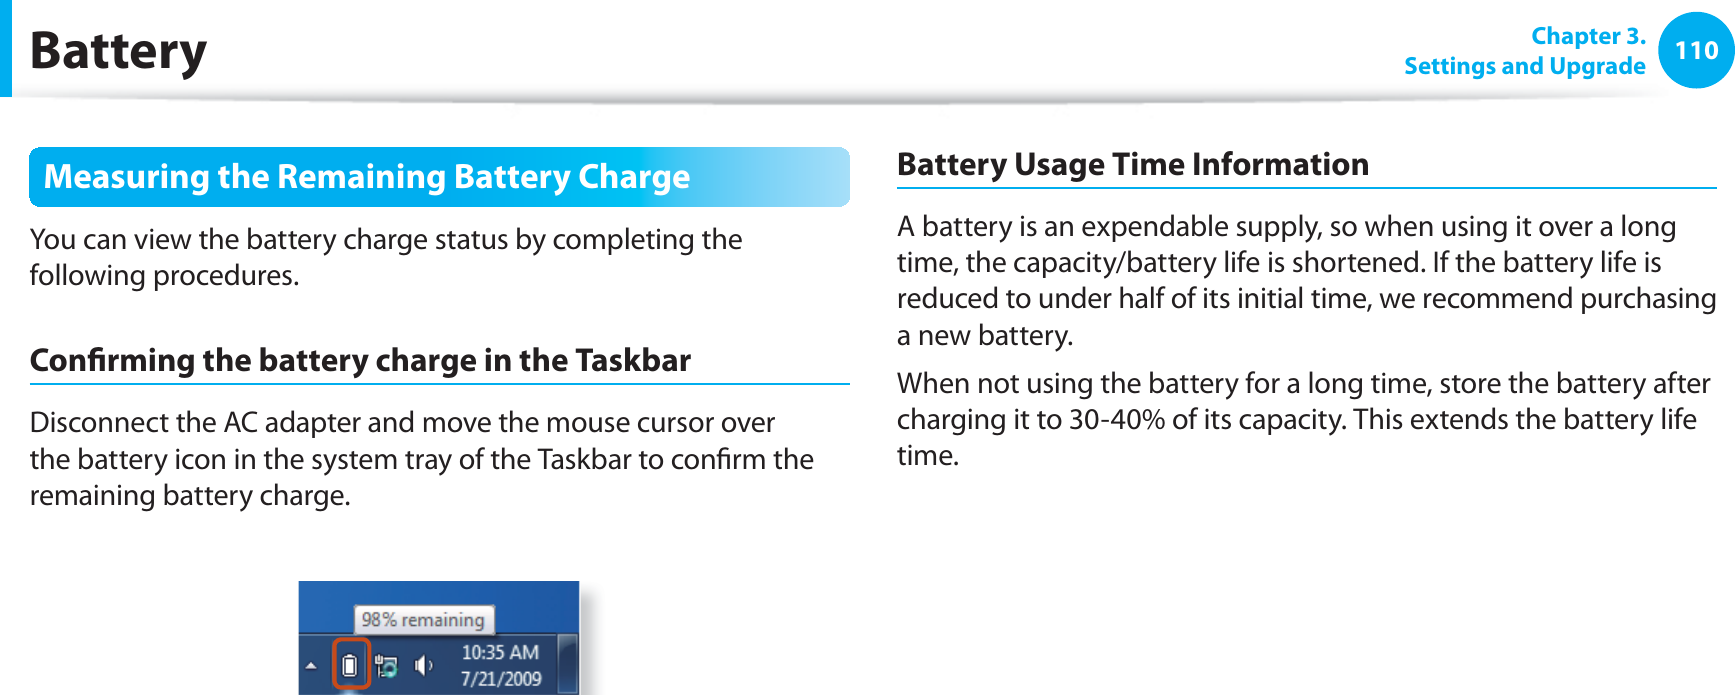 110 Chapter  3.Settings and UpgradeBatteryMeasuring the Remaining Battery ChargeYou can view the battery charge status by completing the following procedures.Conﬁ rming the battery charge in the TaskbarDisconnect the AC adapter and move the mouse cursor over the battery icon in the system tray of the Taskbar to conﬁ rm the remaining battery charge.Battery Usage Time InformationA battery is an expendable supply, so when using it over a long time, the capacity/battery life is shortened. If the battery life is reduced to under half of its initial time, we recommend purchasing a new battery.When not using the battery for a long time, store the battery after charging it to 30-40% of its capacity. This extends the battery life time.